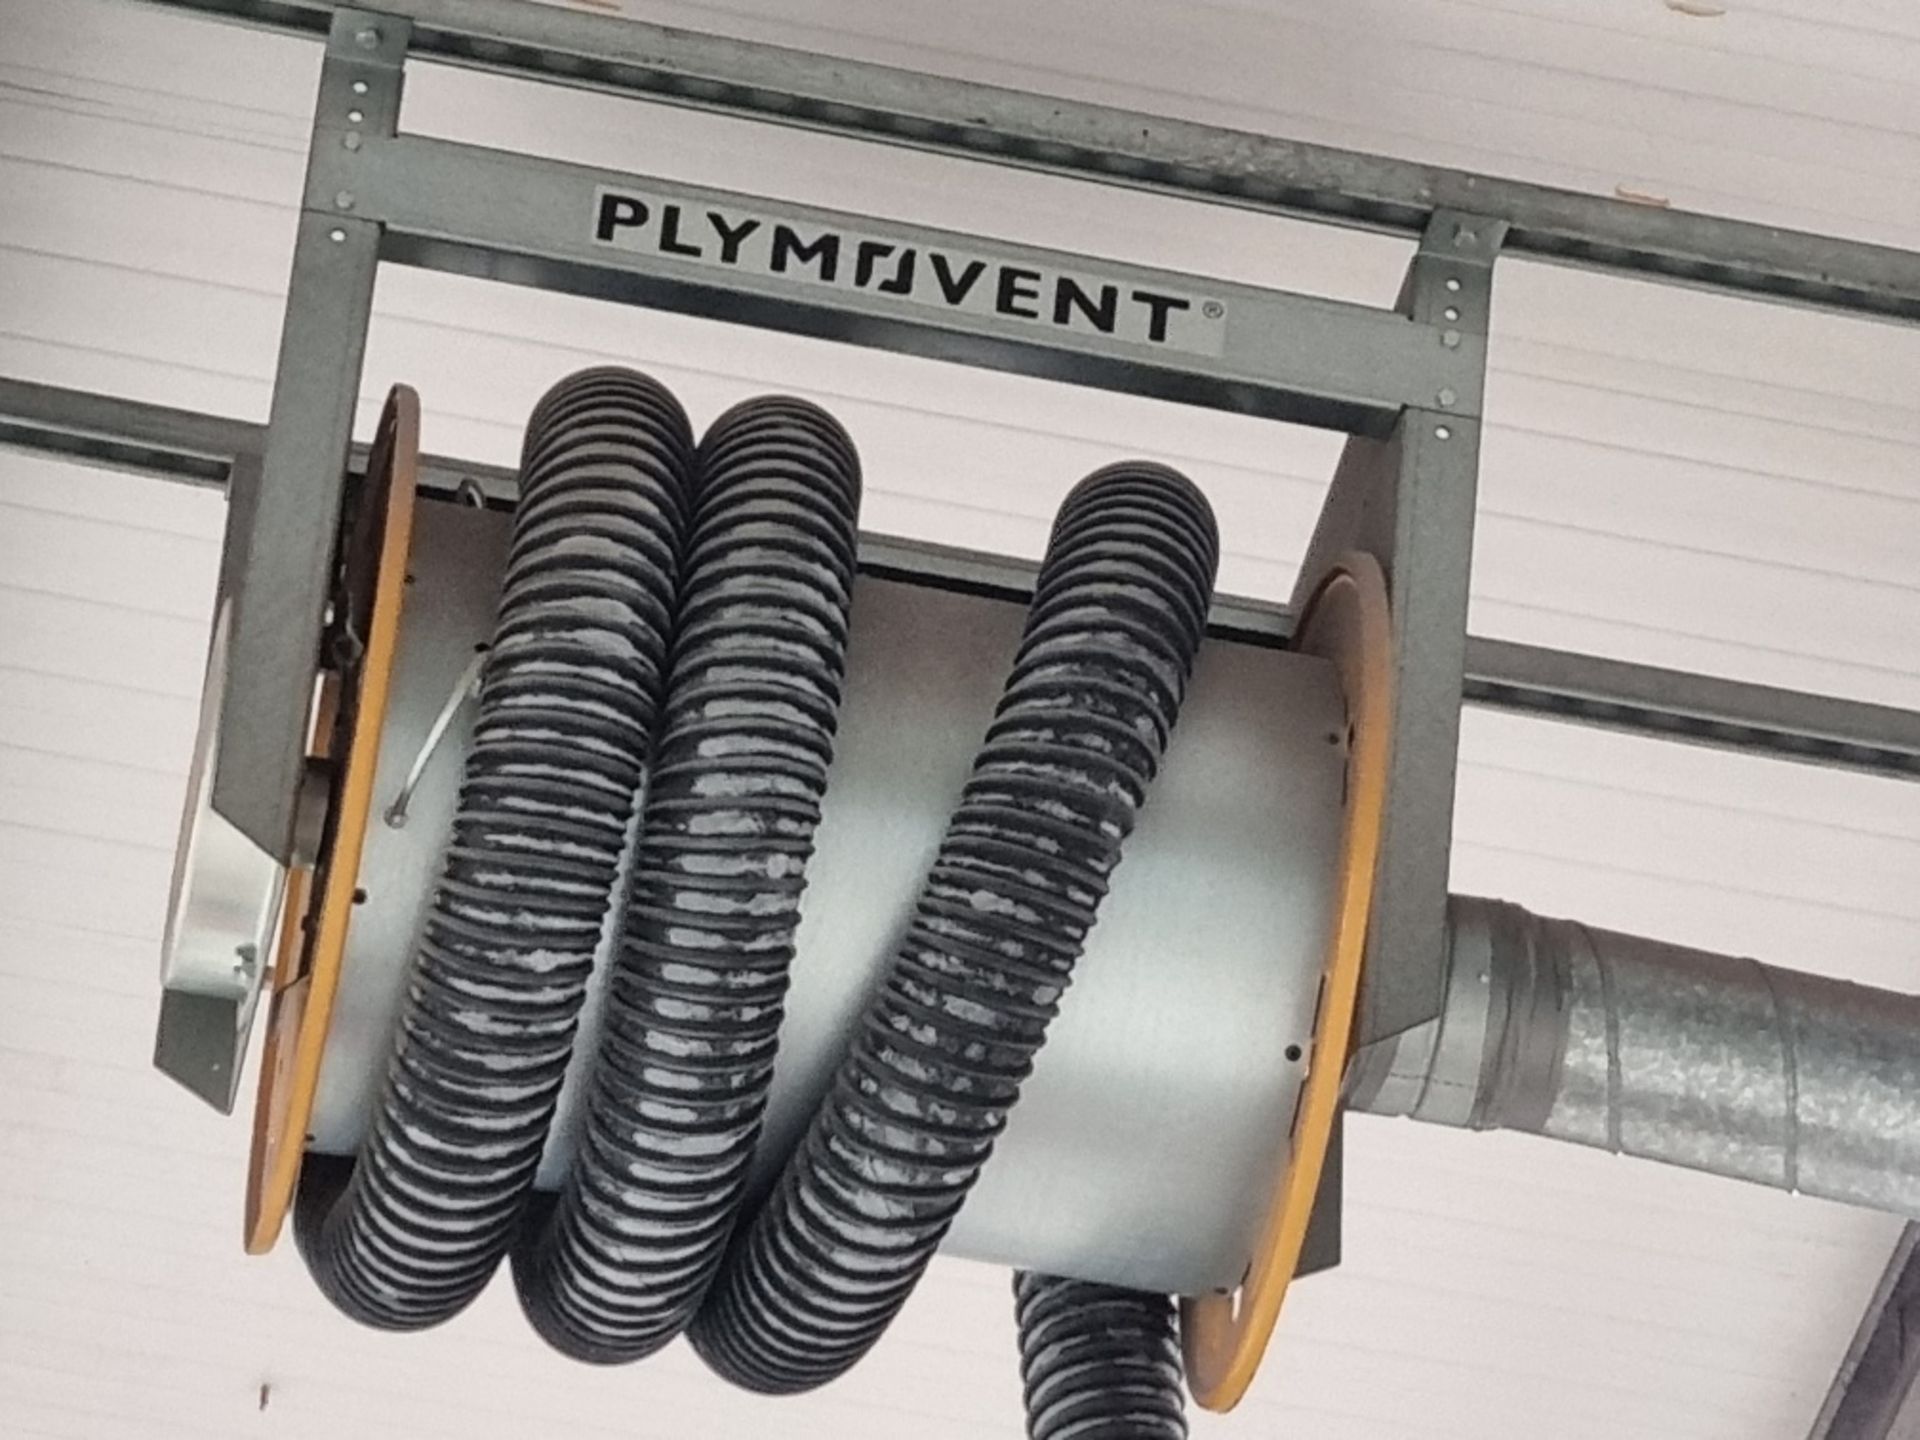 4 X CEILING MOUNTED PLYMOVENT SER SUSPENDED SPRING-OPERATED HOSE REEL (SER) RETRACTING HOSE FUME